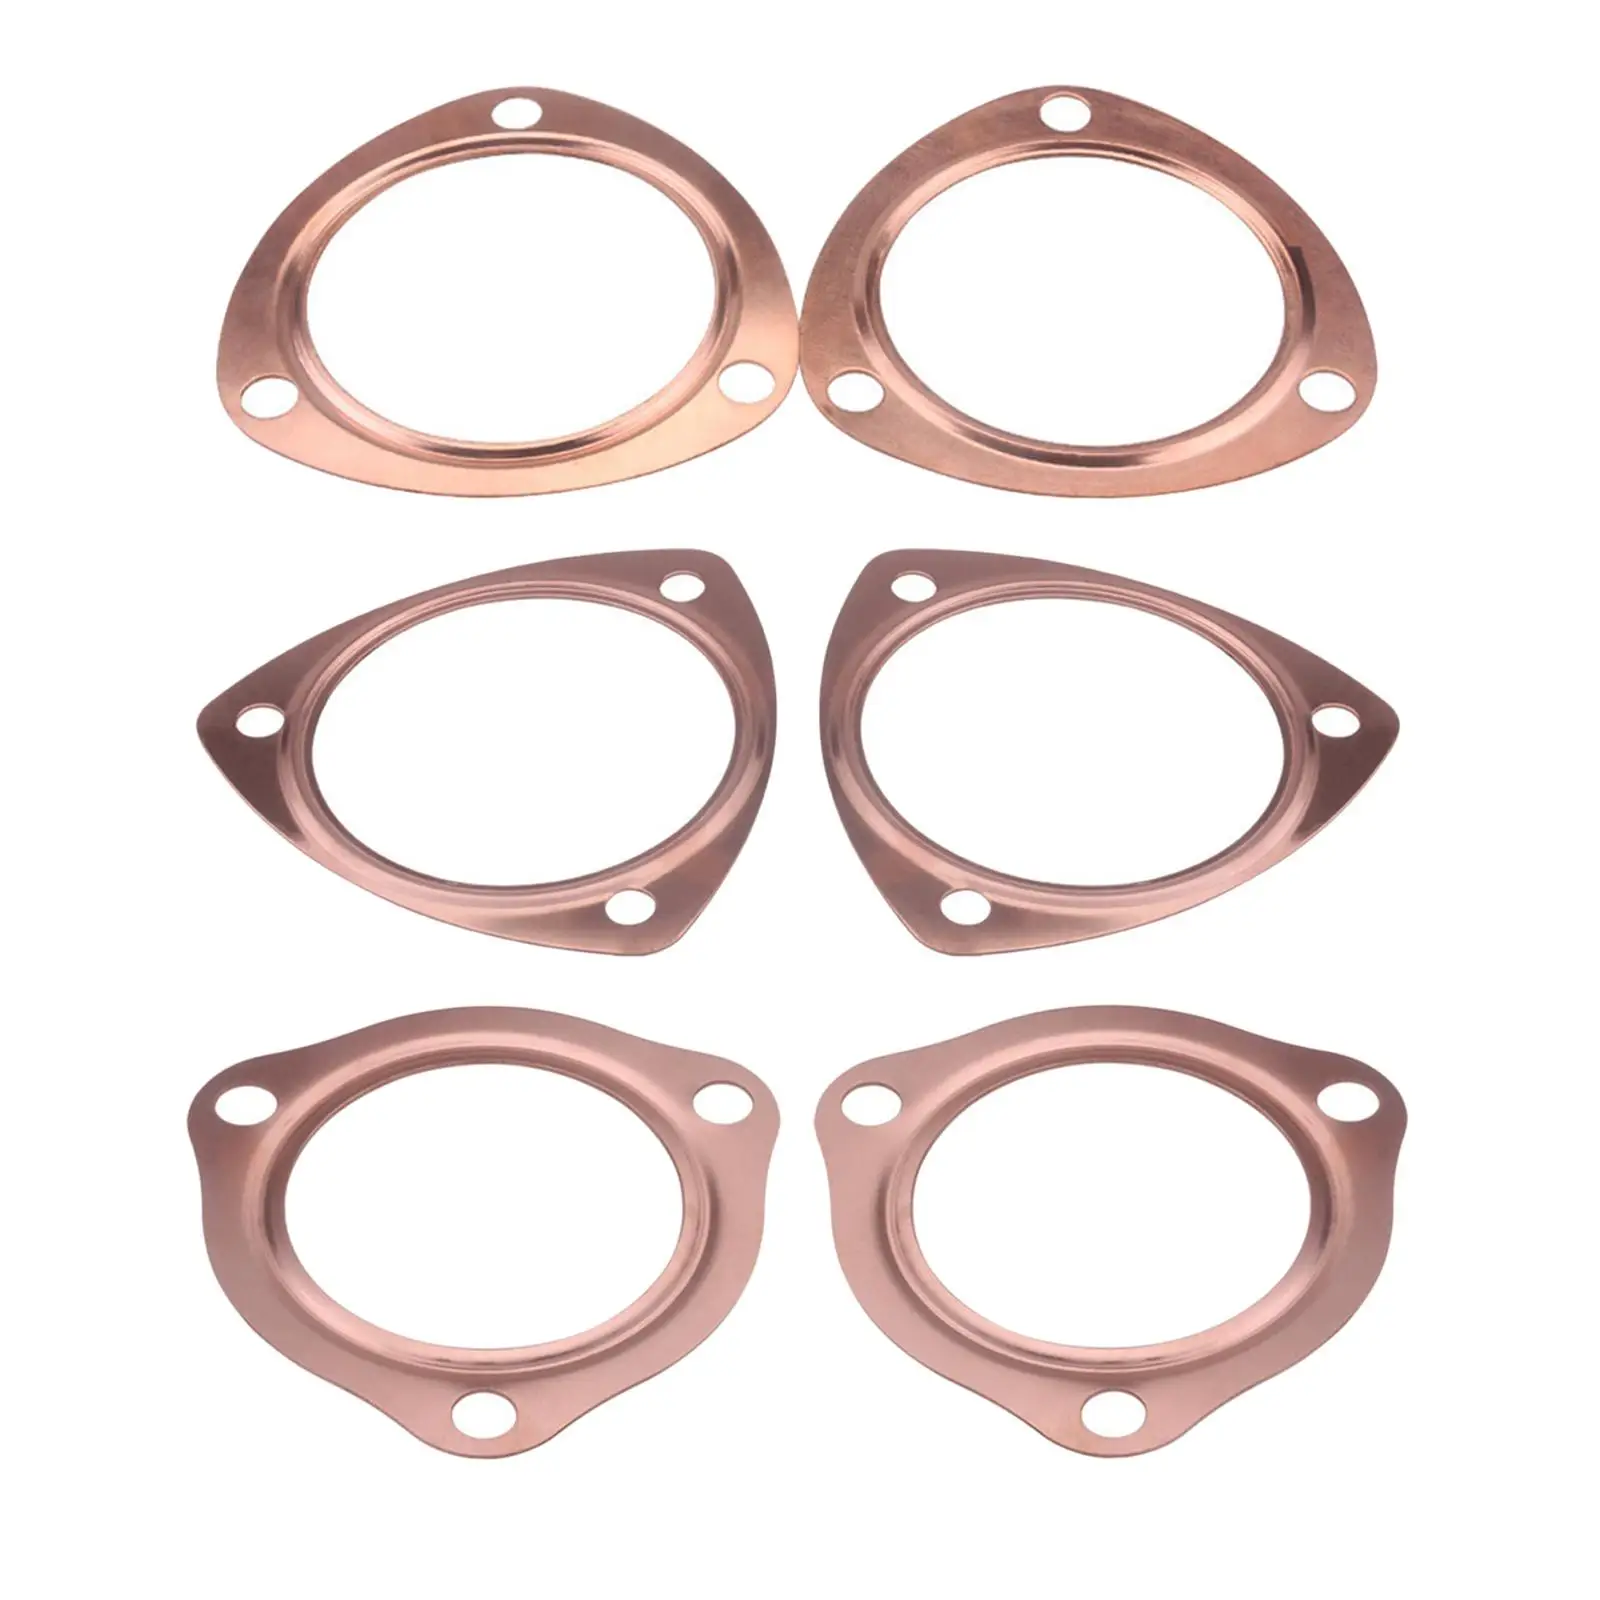 Copper Collector Gasket Anti Scratch Wear Resisting Anti Strike for Sbc 302 350 454 Car Direct Replaces Spare Parts